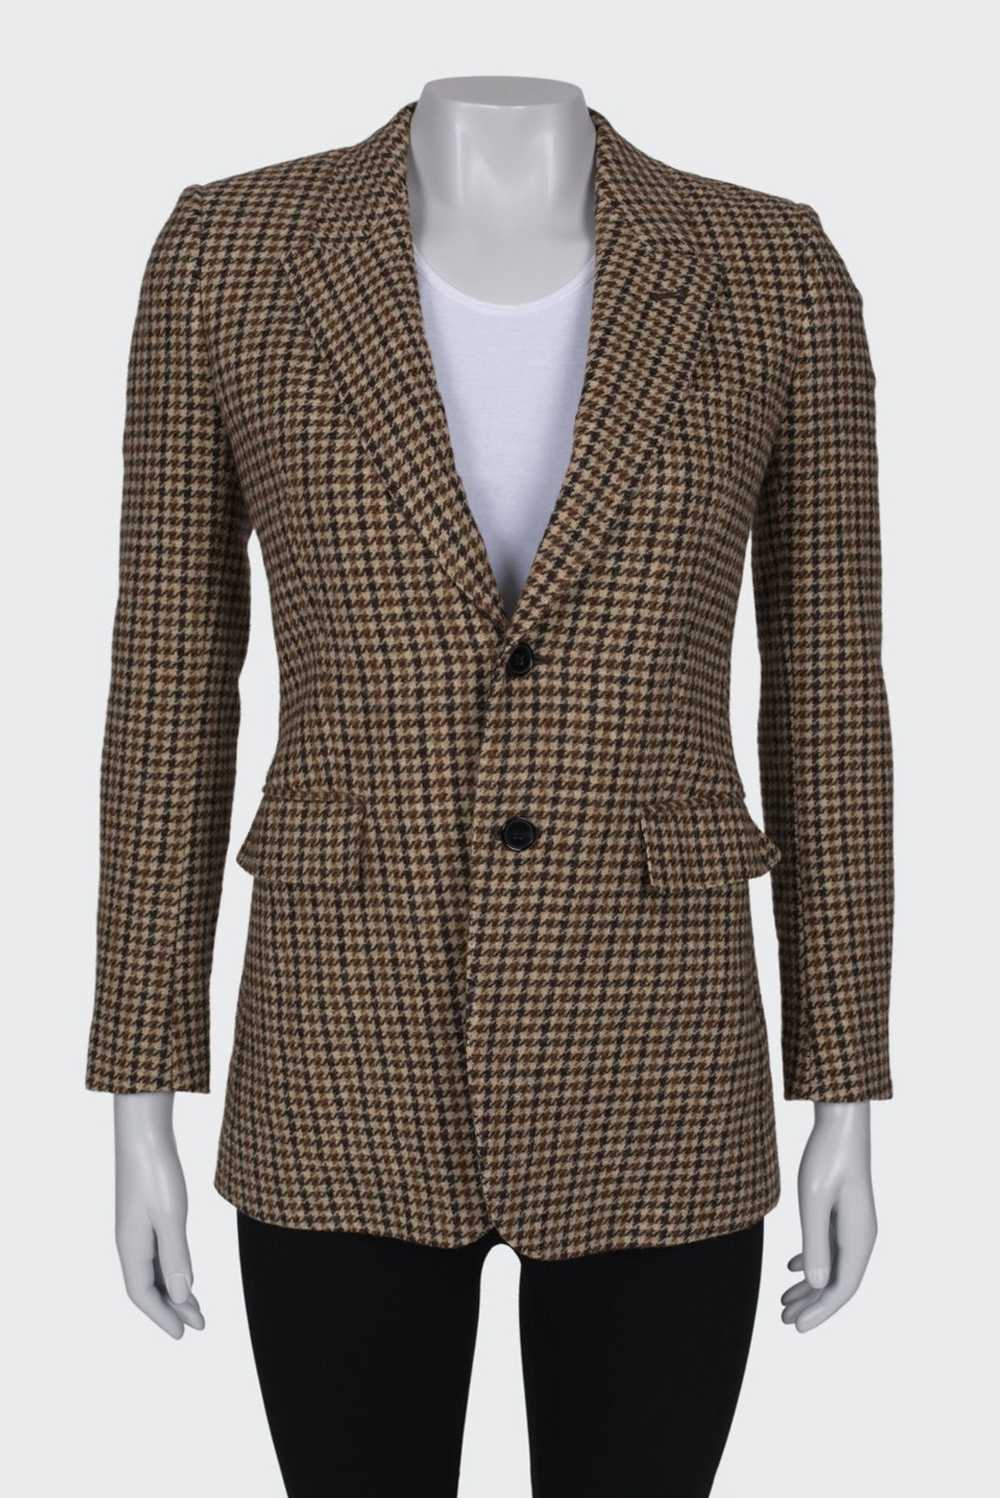 Yves Saint Laurent Jacket with a houndstooth print - image 1